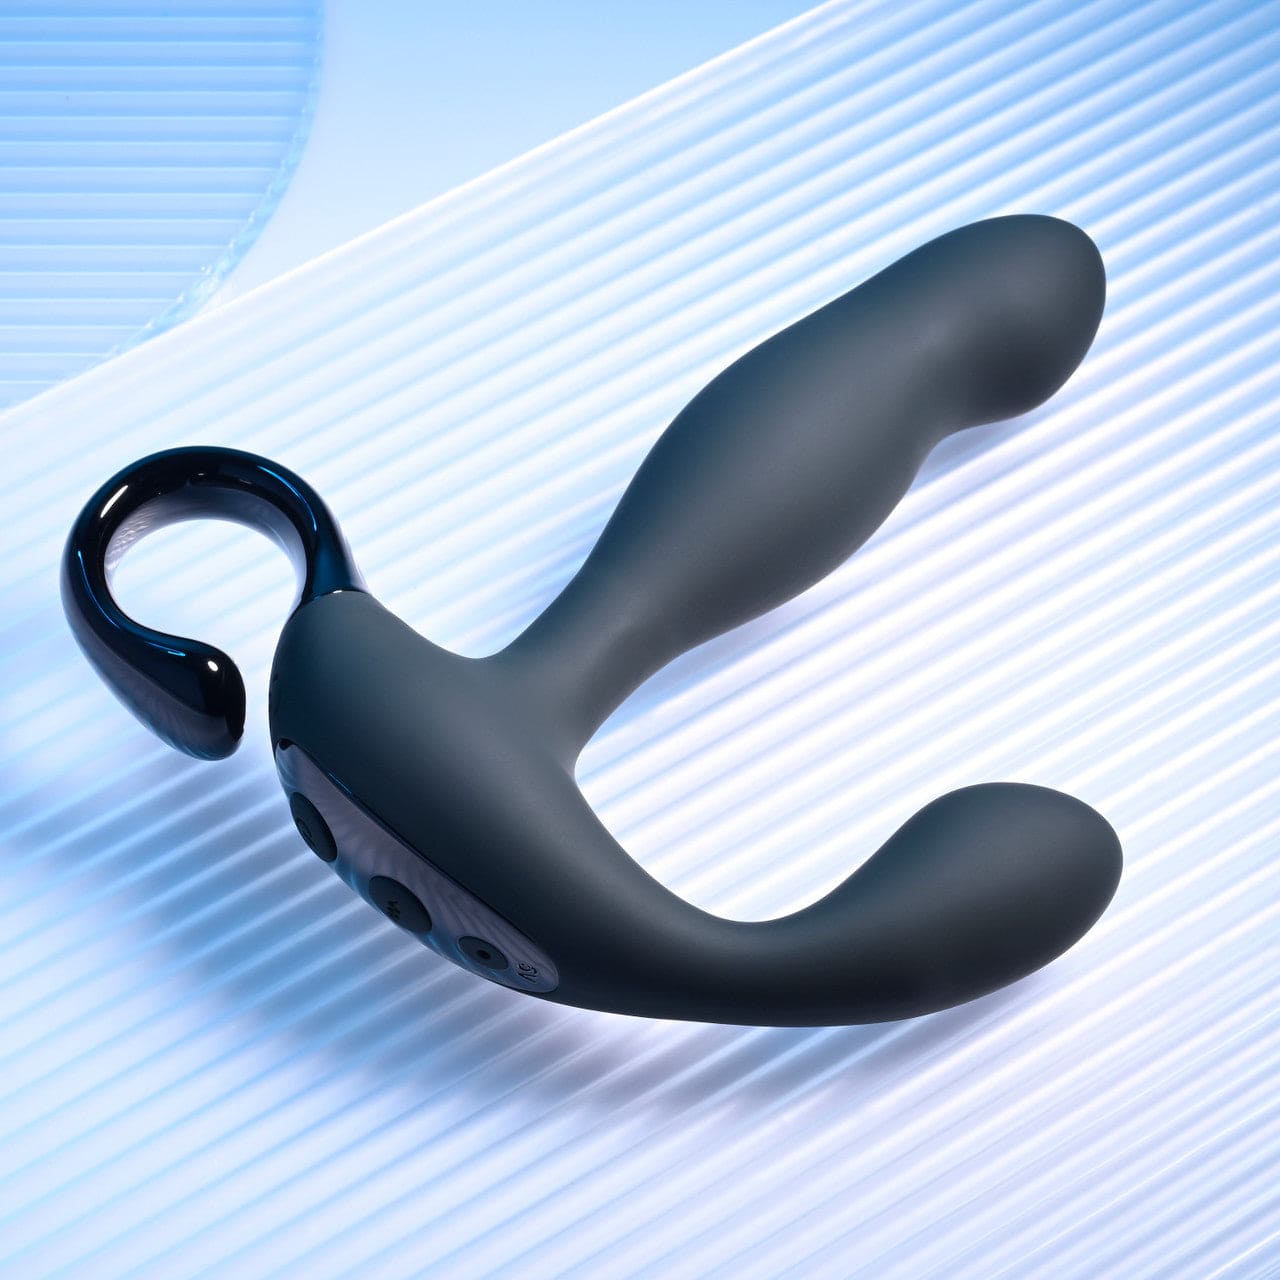 Playboy Pleasure Come Hither Prostate Massager - Rolik®